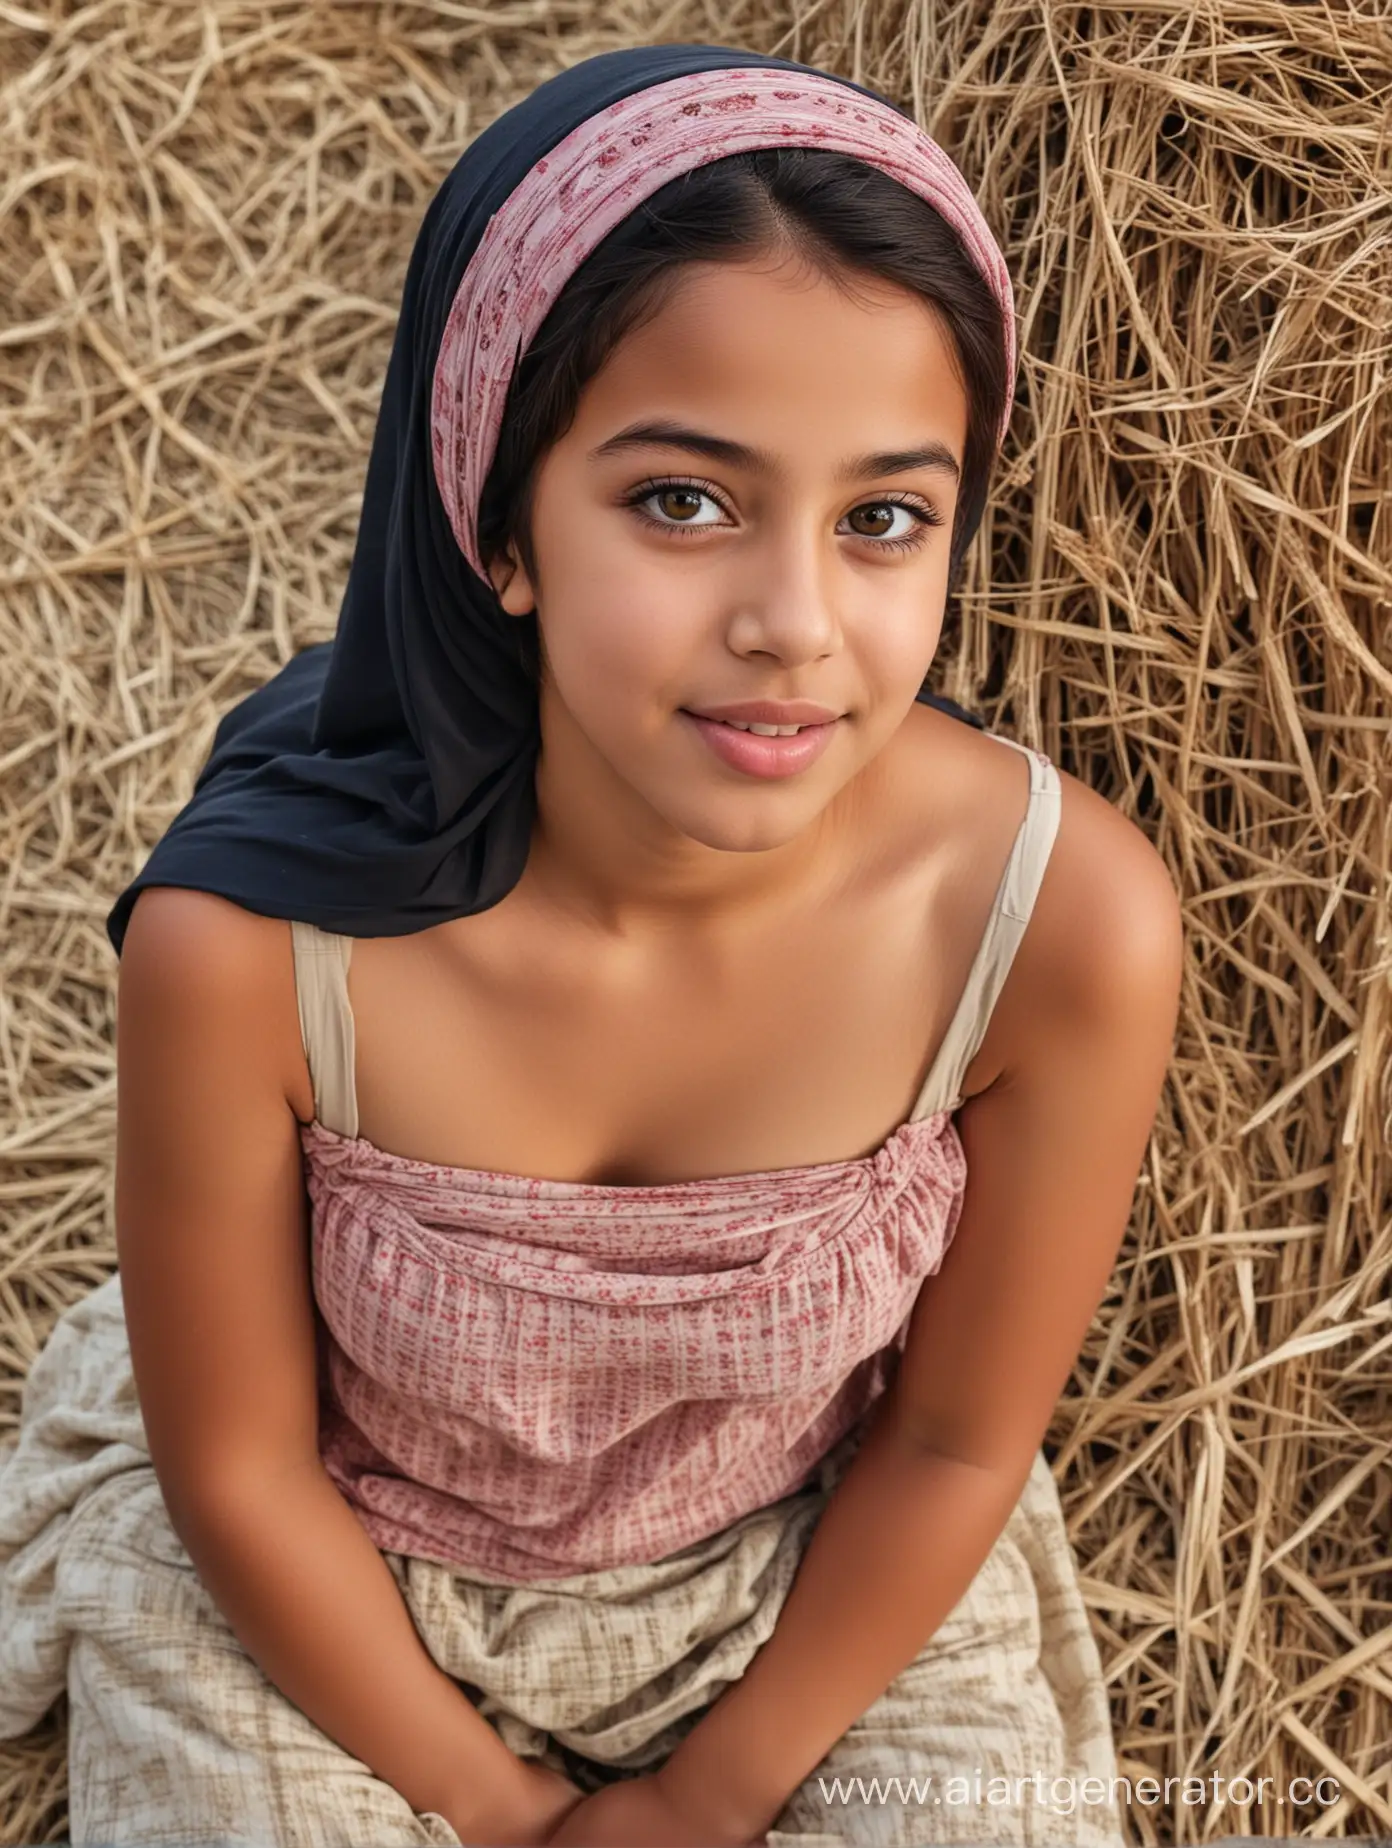 A little egyptian girl. 12 years old. She wears a hijab, strapless tank top, underpants. Close pov shot. Close up. From above. 8k sharp. Pretty face. Sits on the hay bales. Pursed lips. So beautiful, so cute. Opens mouth. Pov. Looks horny. Sharp eyes. Tongue is out.